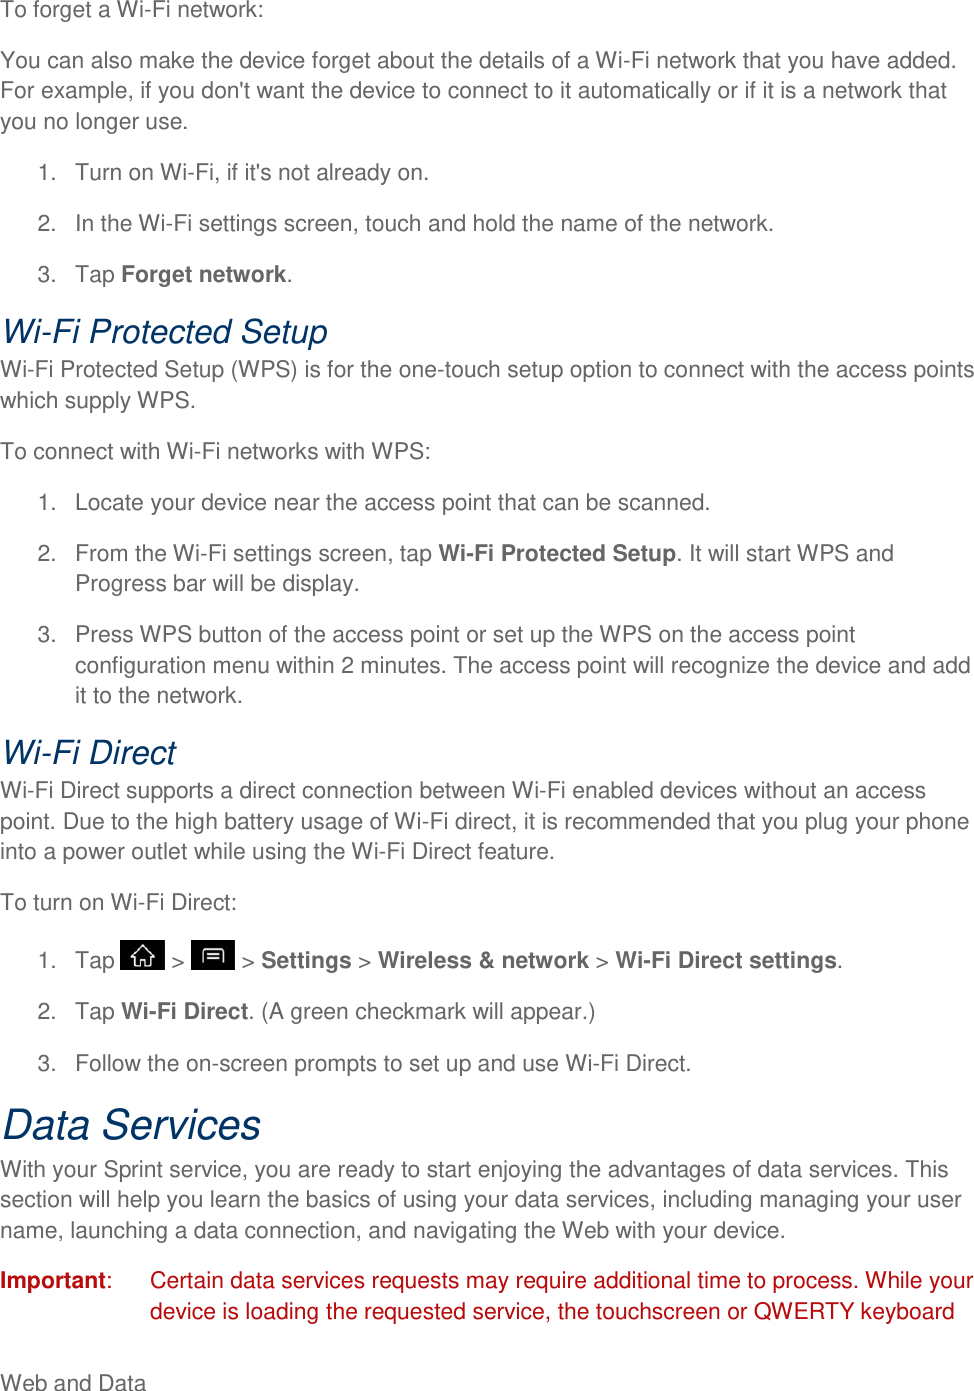 Web and Data     To forget a Wi-Fi network: You can also make the device forget about the details of a Wi-Fi network that you have added. For example, if you don&apos;t want the device to connect to it automatically or if it is a network that you no longer use. 1.  Turn on Wi-Fi, if it&apos;s not already on. 2.  In the Wi-Fi settings screen, touch and hold the name of the network. 3.  Tap Forget network. Wi-Fi Protected Setup Wi-Fi Protected Setup (WPS) is for the one-touch setup option to connect with the access points which supply WPS. To connect with Wi-Fi networks with WPS: 1.  Locate your device near the access point that can be scanned. 2.  From the Wi-Fi settings screen, tap Wi-Fi Protected Setup. It will start WPS and Progress bar will be display. 3.  Press WPS button of the access point or set up the WPS on the access point configuration menu within 2 minutes. The access point will recognize the device and add it to the network. Wi-Fi Direct Wi-Fi Direct supports a direct connection between Wi-Fi enabled devices without an access point. Due to the high battery usage of Wi-Fi direct, it is recommended that you plug your phone into a power outlet while using the Wi-Fi Direct feature. To turn on Wi-Fi Direct: 1.  Tap   &gt;   &gt; Settings &gt; Wireless &amp; network &gt; Wi-Fi Direct settings. 2.  Tap Wi-Fi Direct. (A green checkmark will appear.) 3.  Follow the on-screen prompts to set up and use Wi-Fi Direct. Data Services With your Sprint service, you are ready to start enjoying the advantages of data services. This section will help you learn the basics of using your data services, including managing your user name, launching a data connection, and navigating the Web with your device. Important:   Certain data services requests may require additional time to process. While your device is loading the requested service, the touchscreen or QWERTY keyboard 